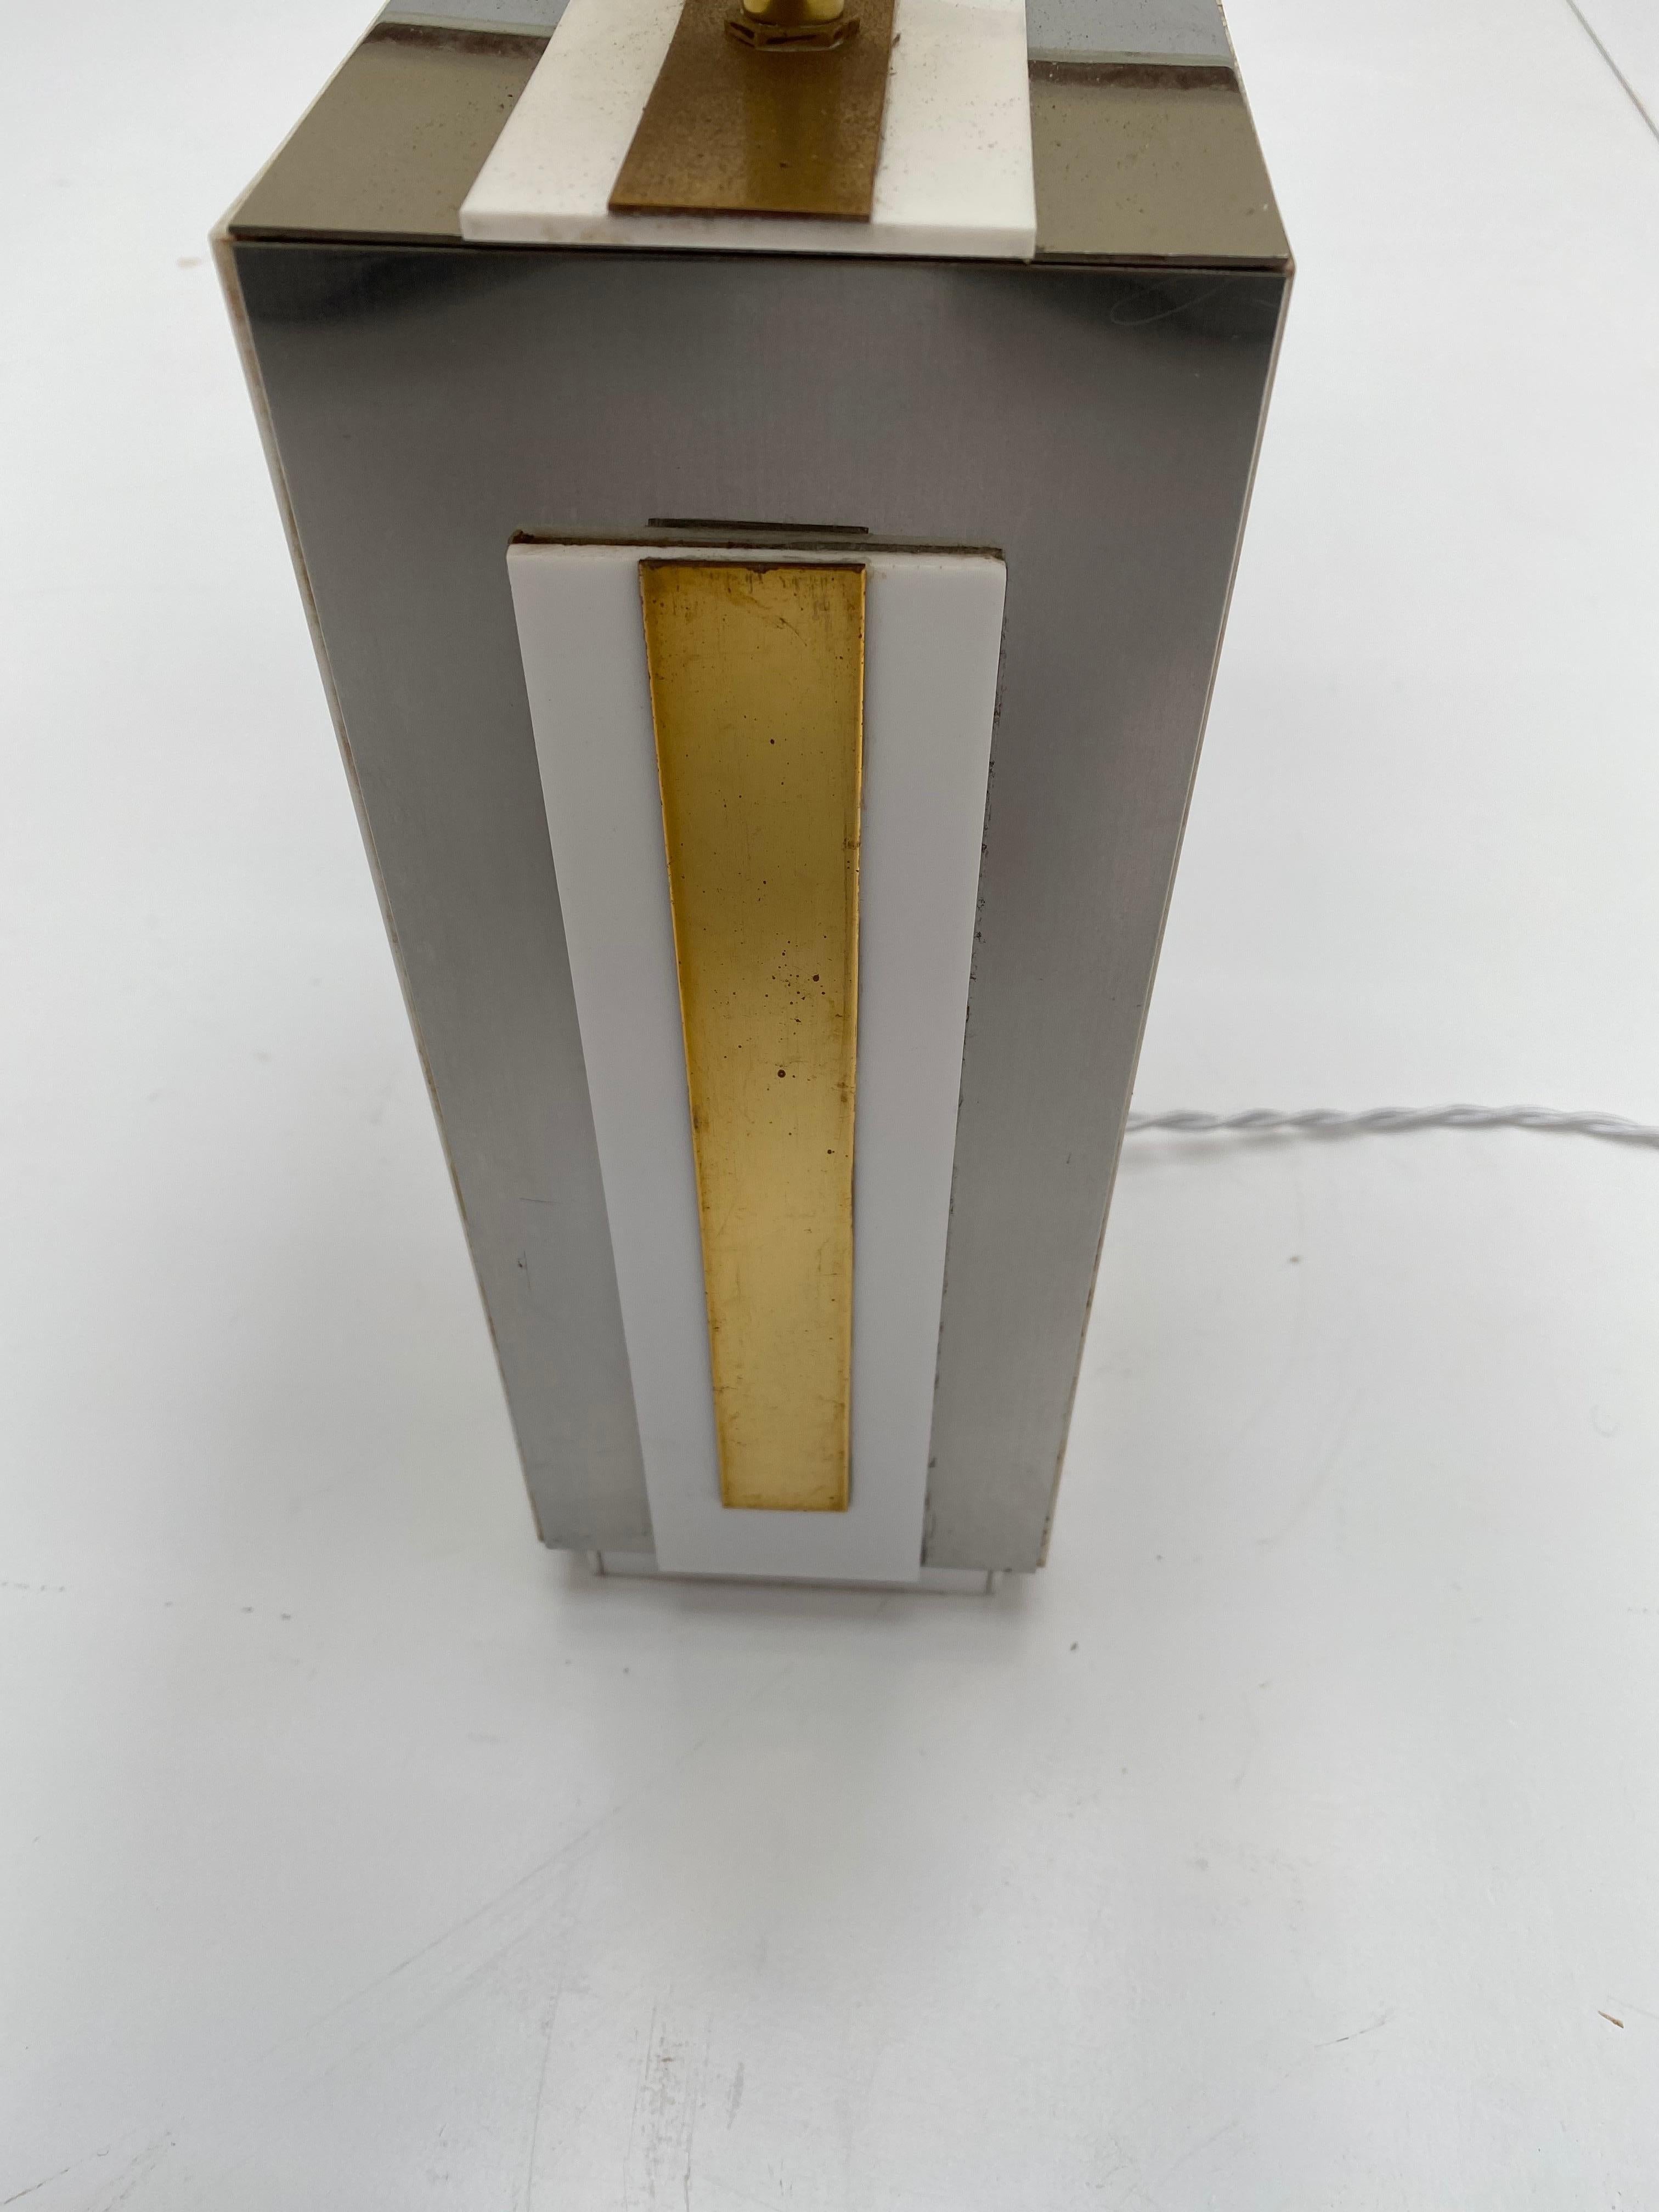 Sculptural Relief Table Lamp by Sculptor 'PH Jean' 1970 Brass Inox Lucite Signed For Sale 10